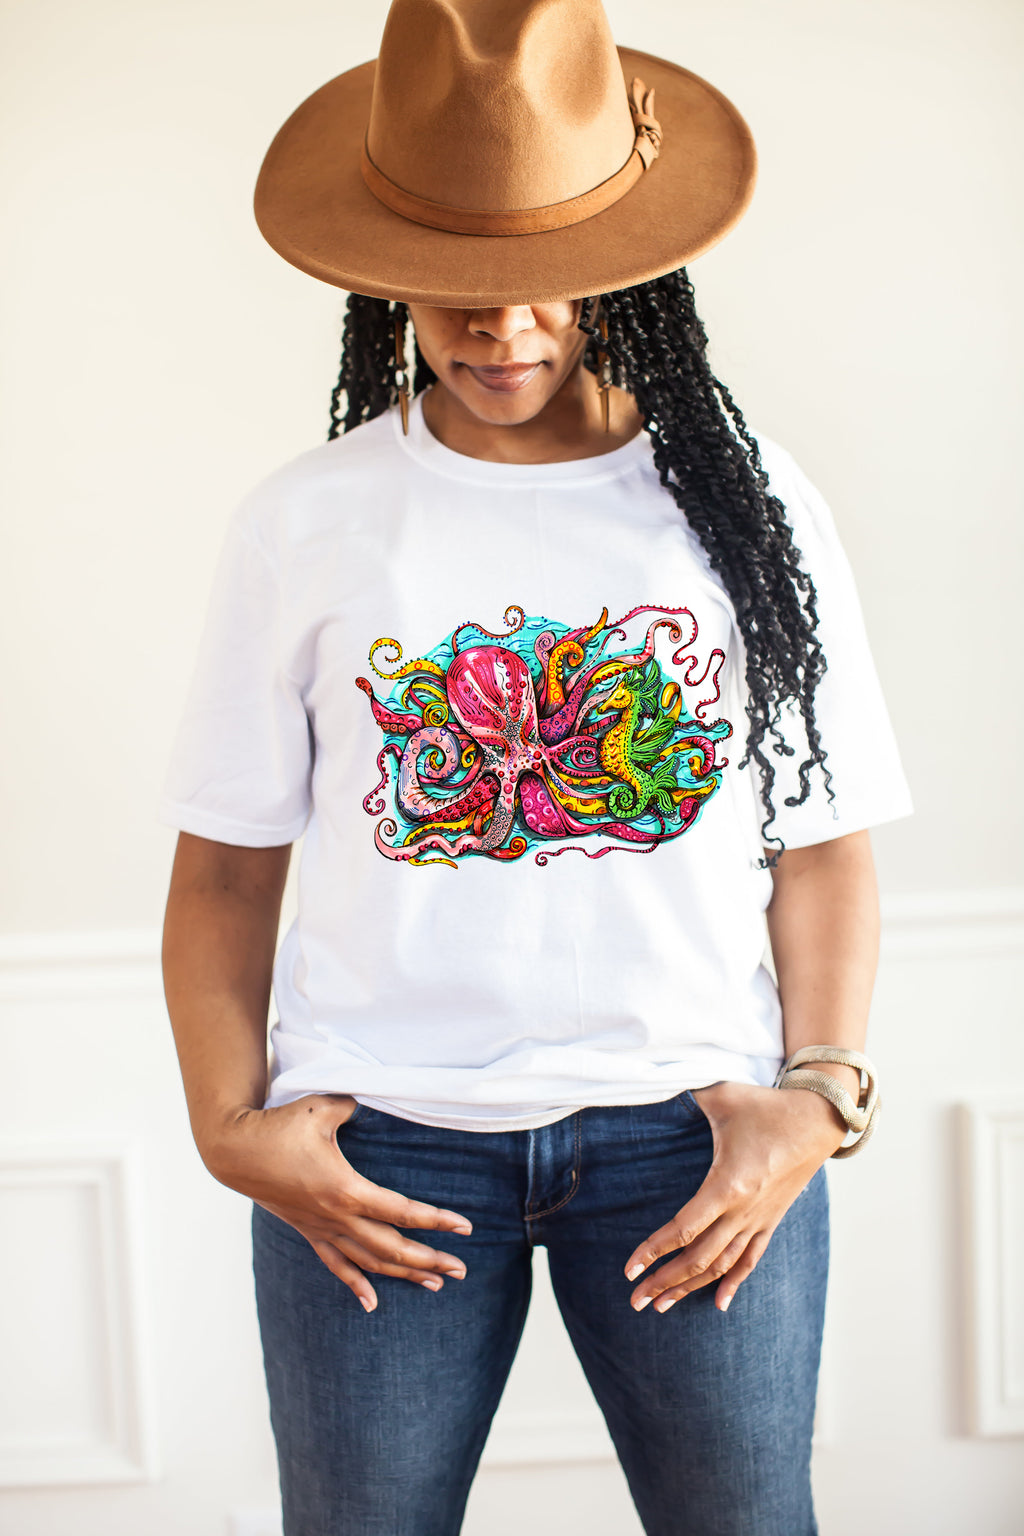 Under The Sea Octopus - Ladies T-Shirt (UK Sizes 8-40) - Artwork by the Very Talented Artist Sarah Neville - Made to Order